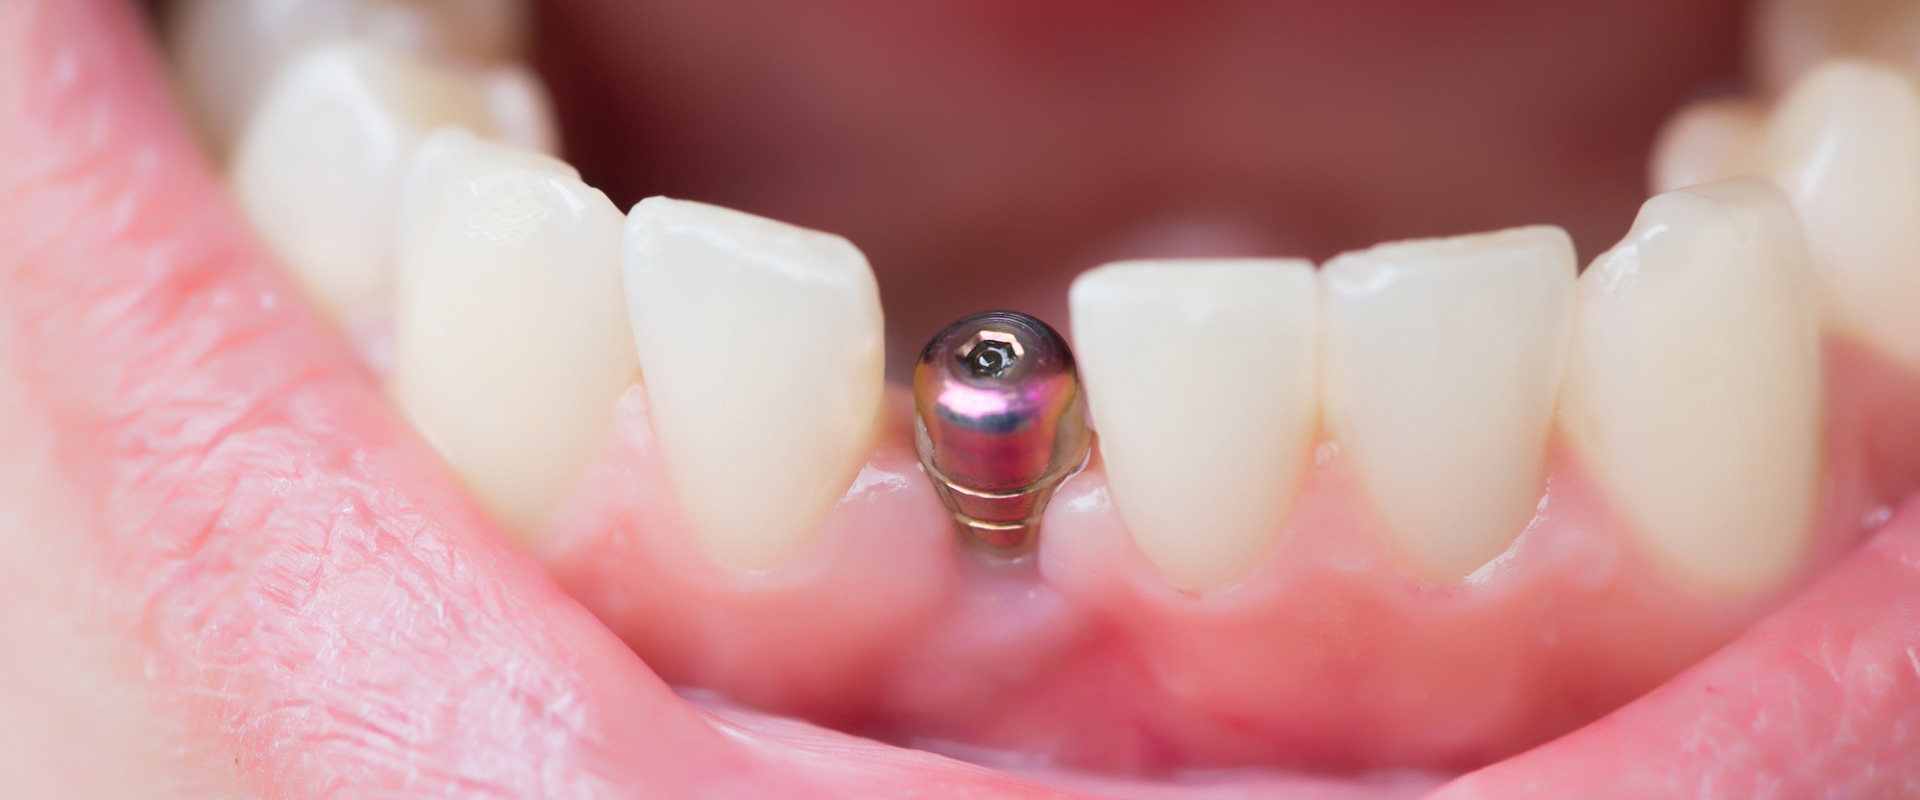 What is dental implant surgery?